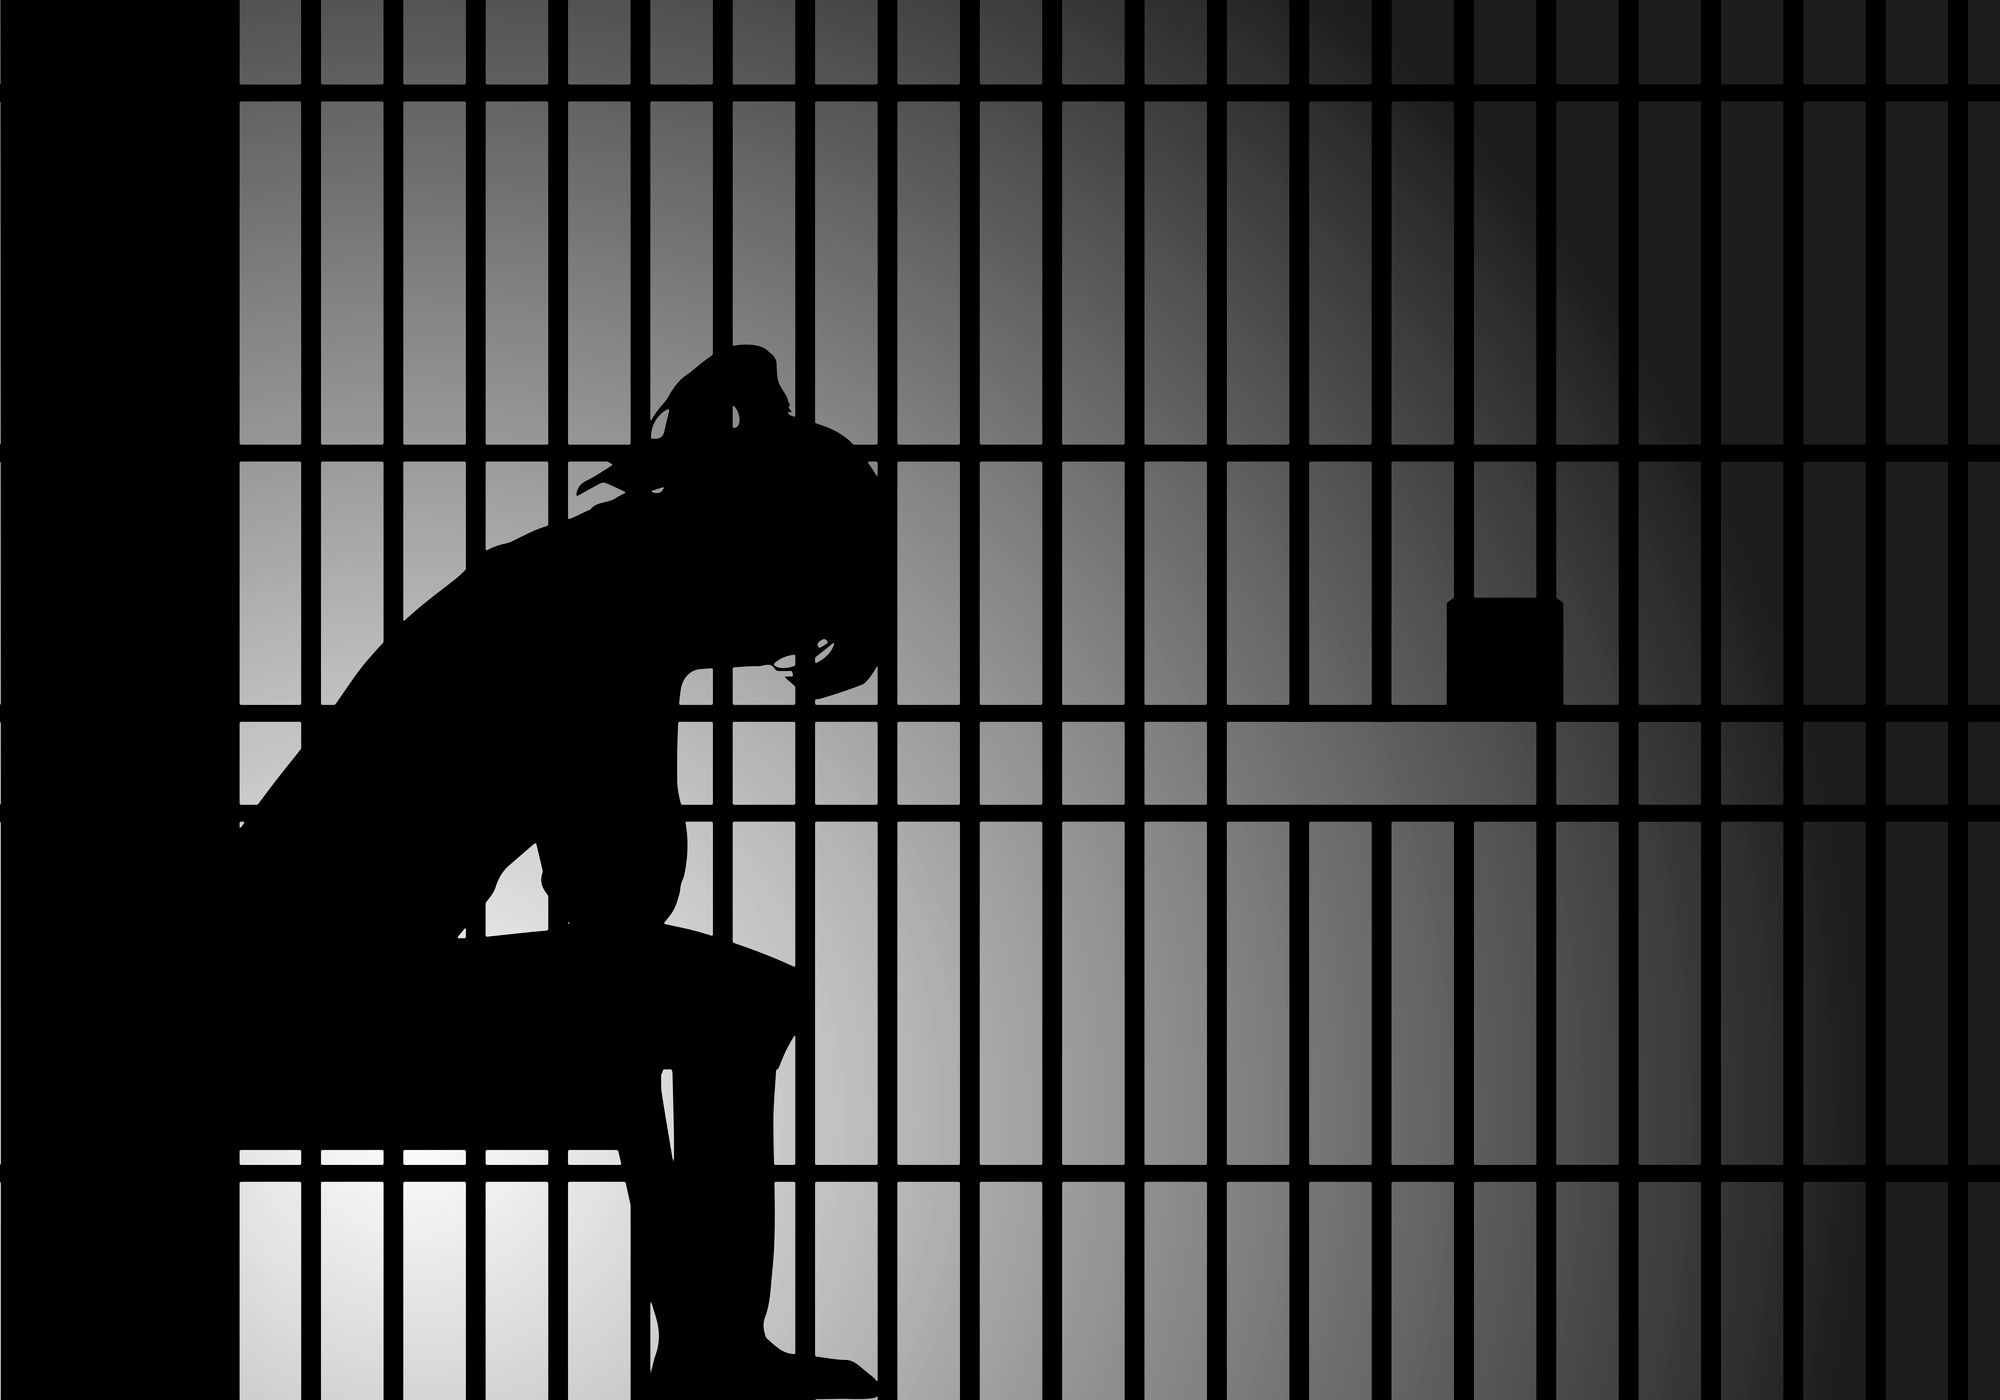 silhouette of a female prisoner regarding the Quebec federal inmate class action lawsuit filed